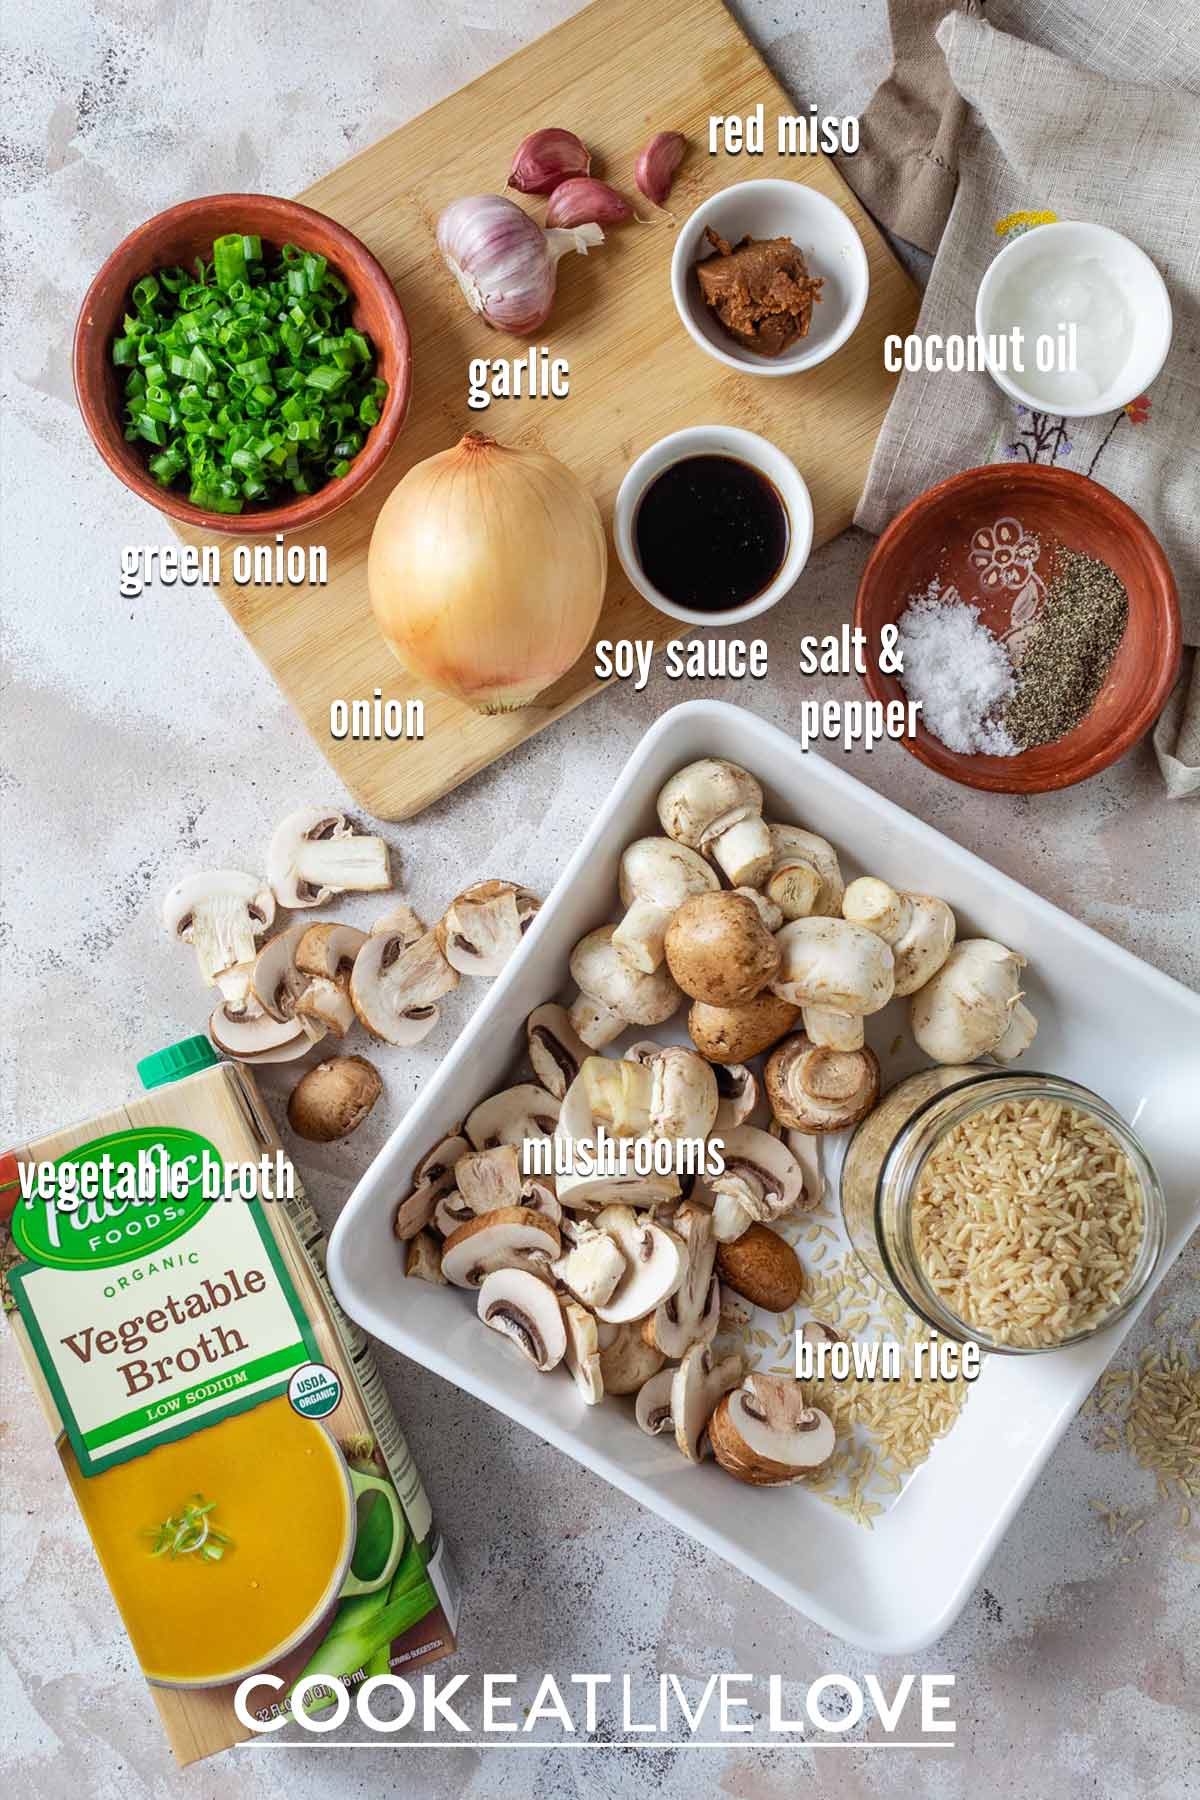 Ingredients to make mushroom brown rice casserole on the table with text labels.